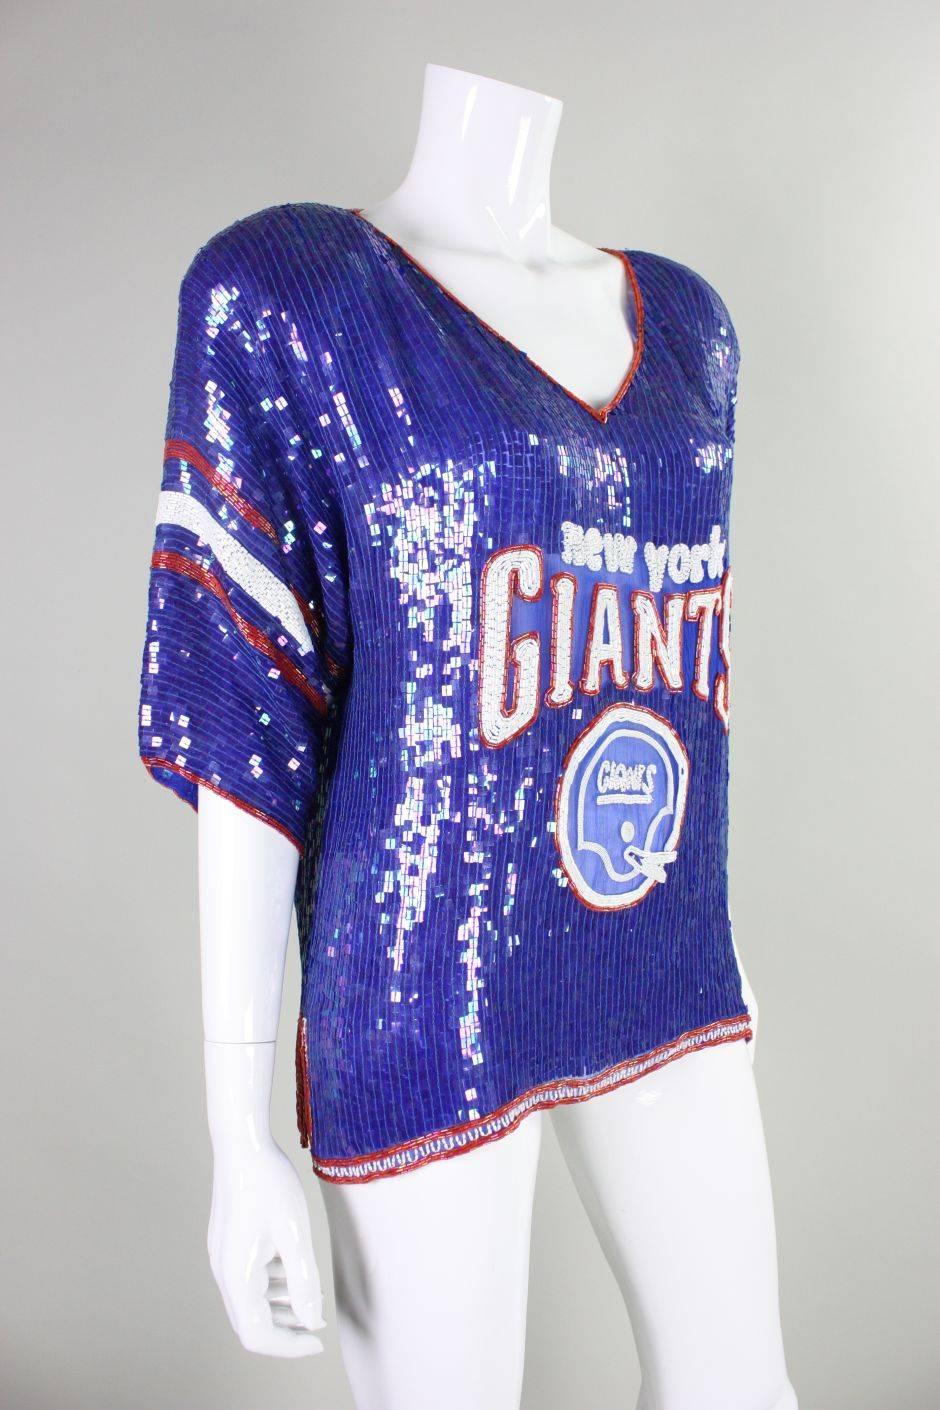 Vintage blouse from Concetta Rafanello for St. Martin dates to the 1980's and is made of blue chiffon that is fully covered with blue square sequins.  It features a New York Giants logo that is worked in bugle beads.  V-neck.  Short sleeves. 